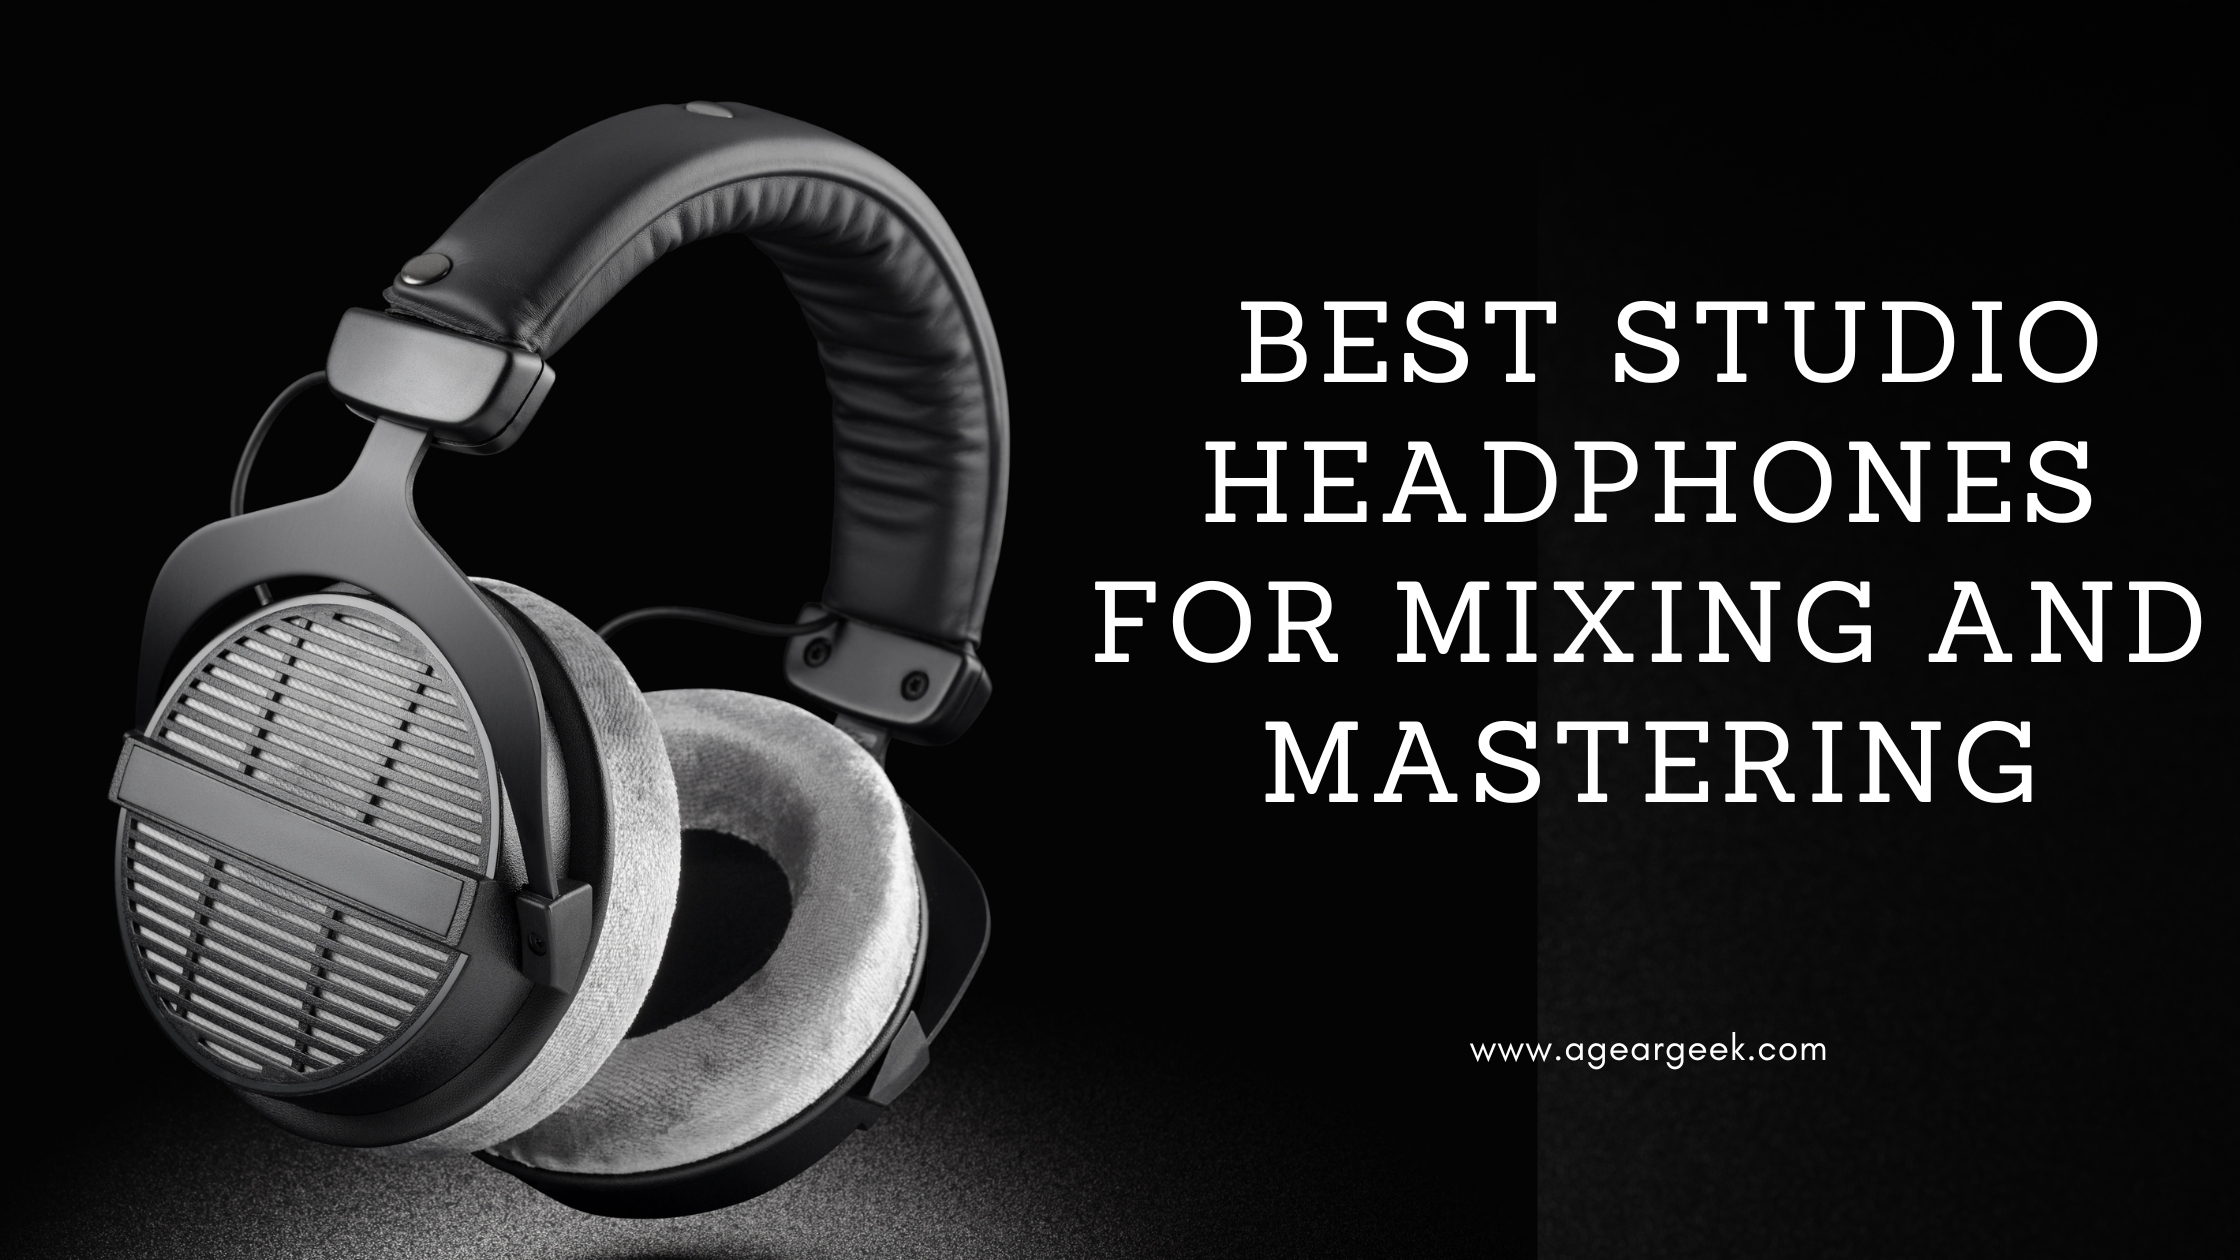 Best Studio Headphones for Mixing and Monitoring